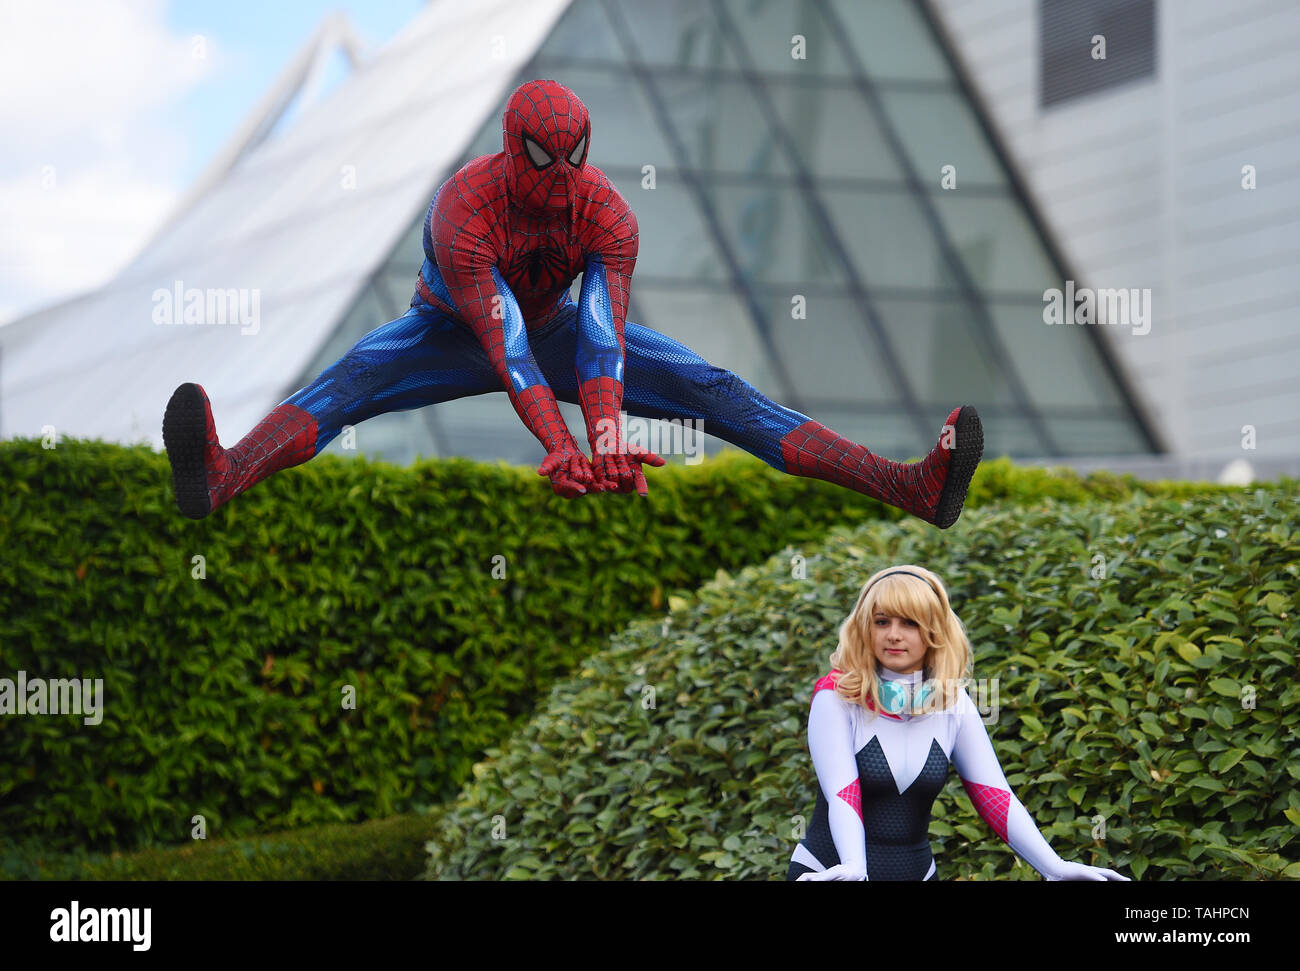 A cosplayer dressed as Spiderman jumps in the air during the second day of MCM Comic Con at the ExCel London in east London. Stock Photo